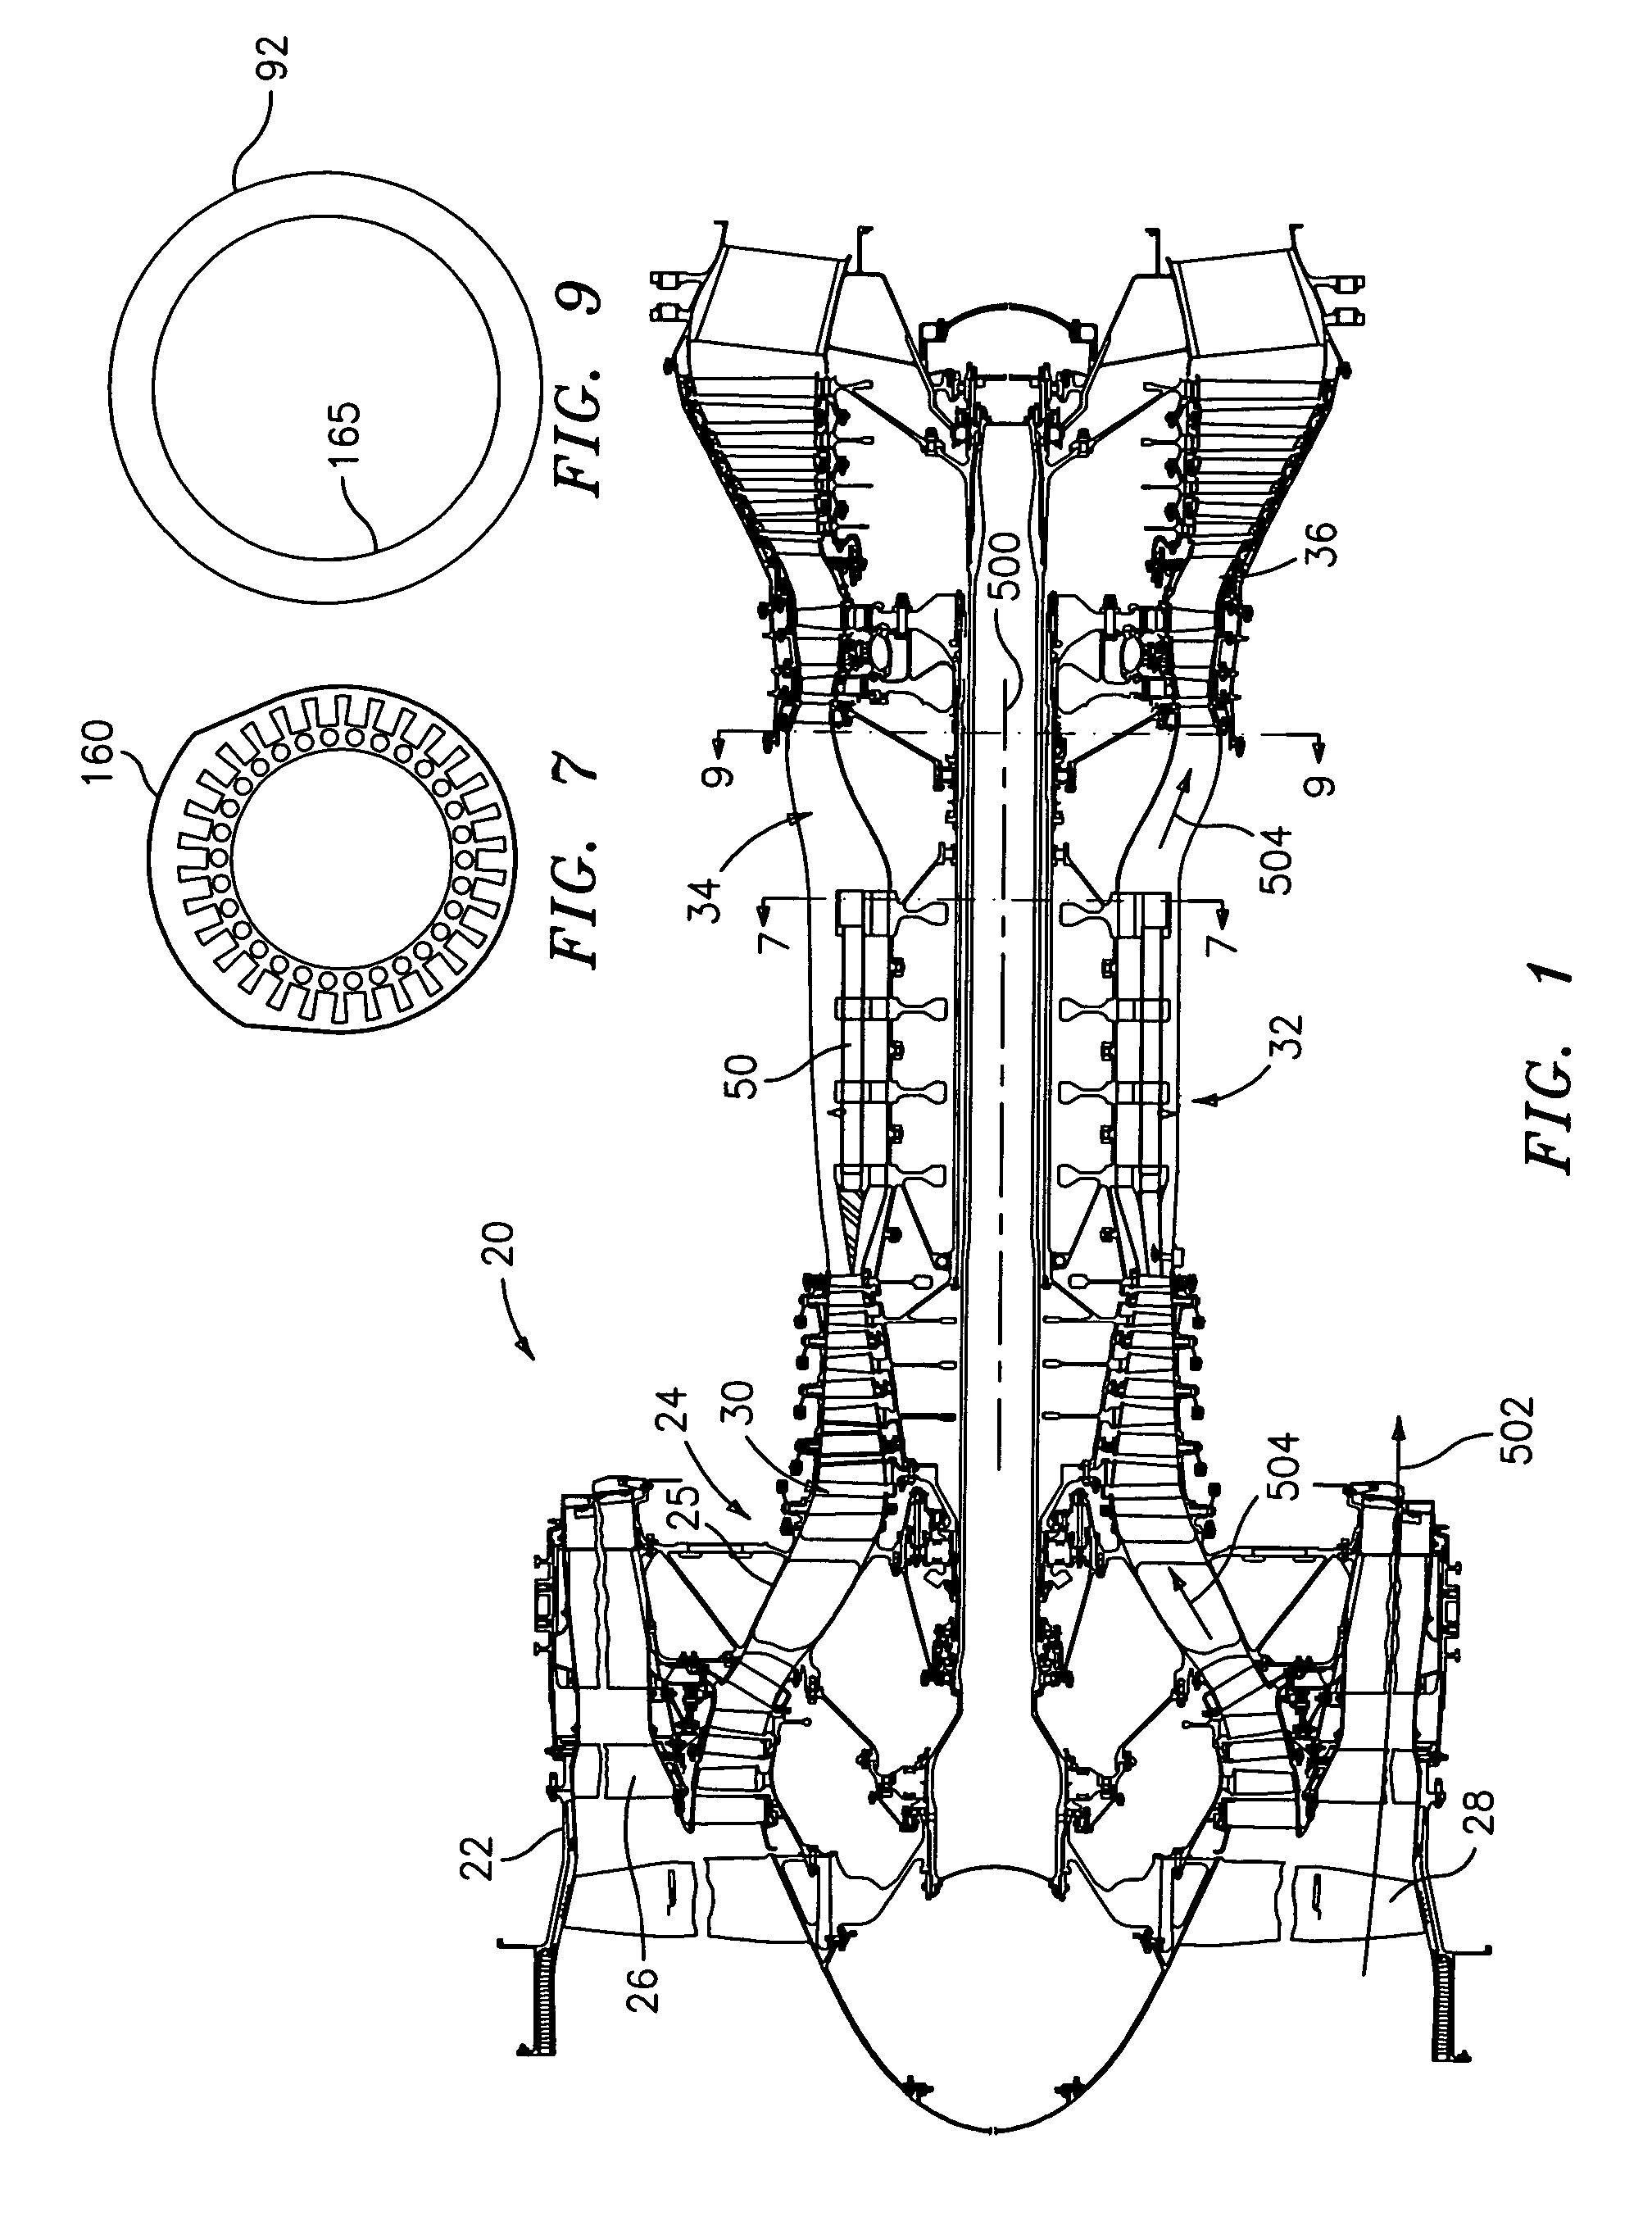 Pulsed combustion engine